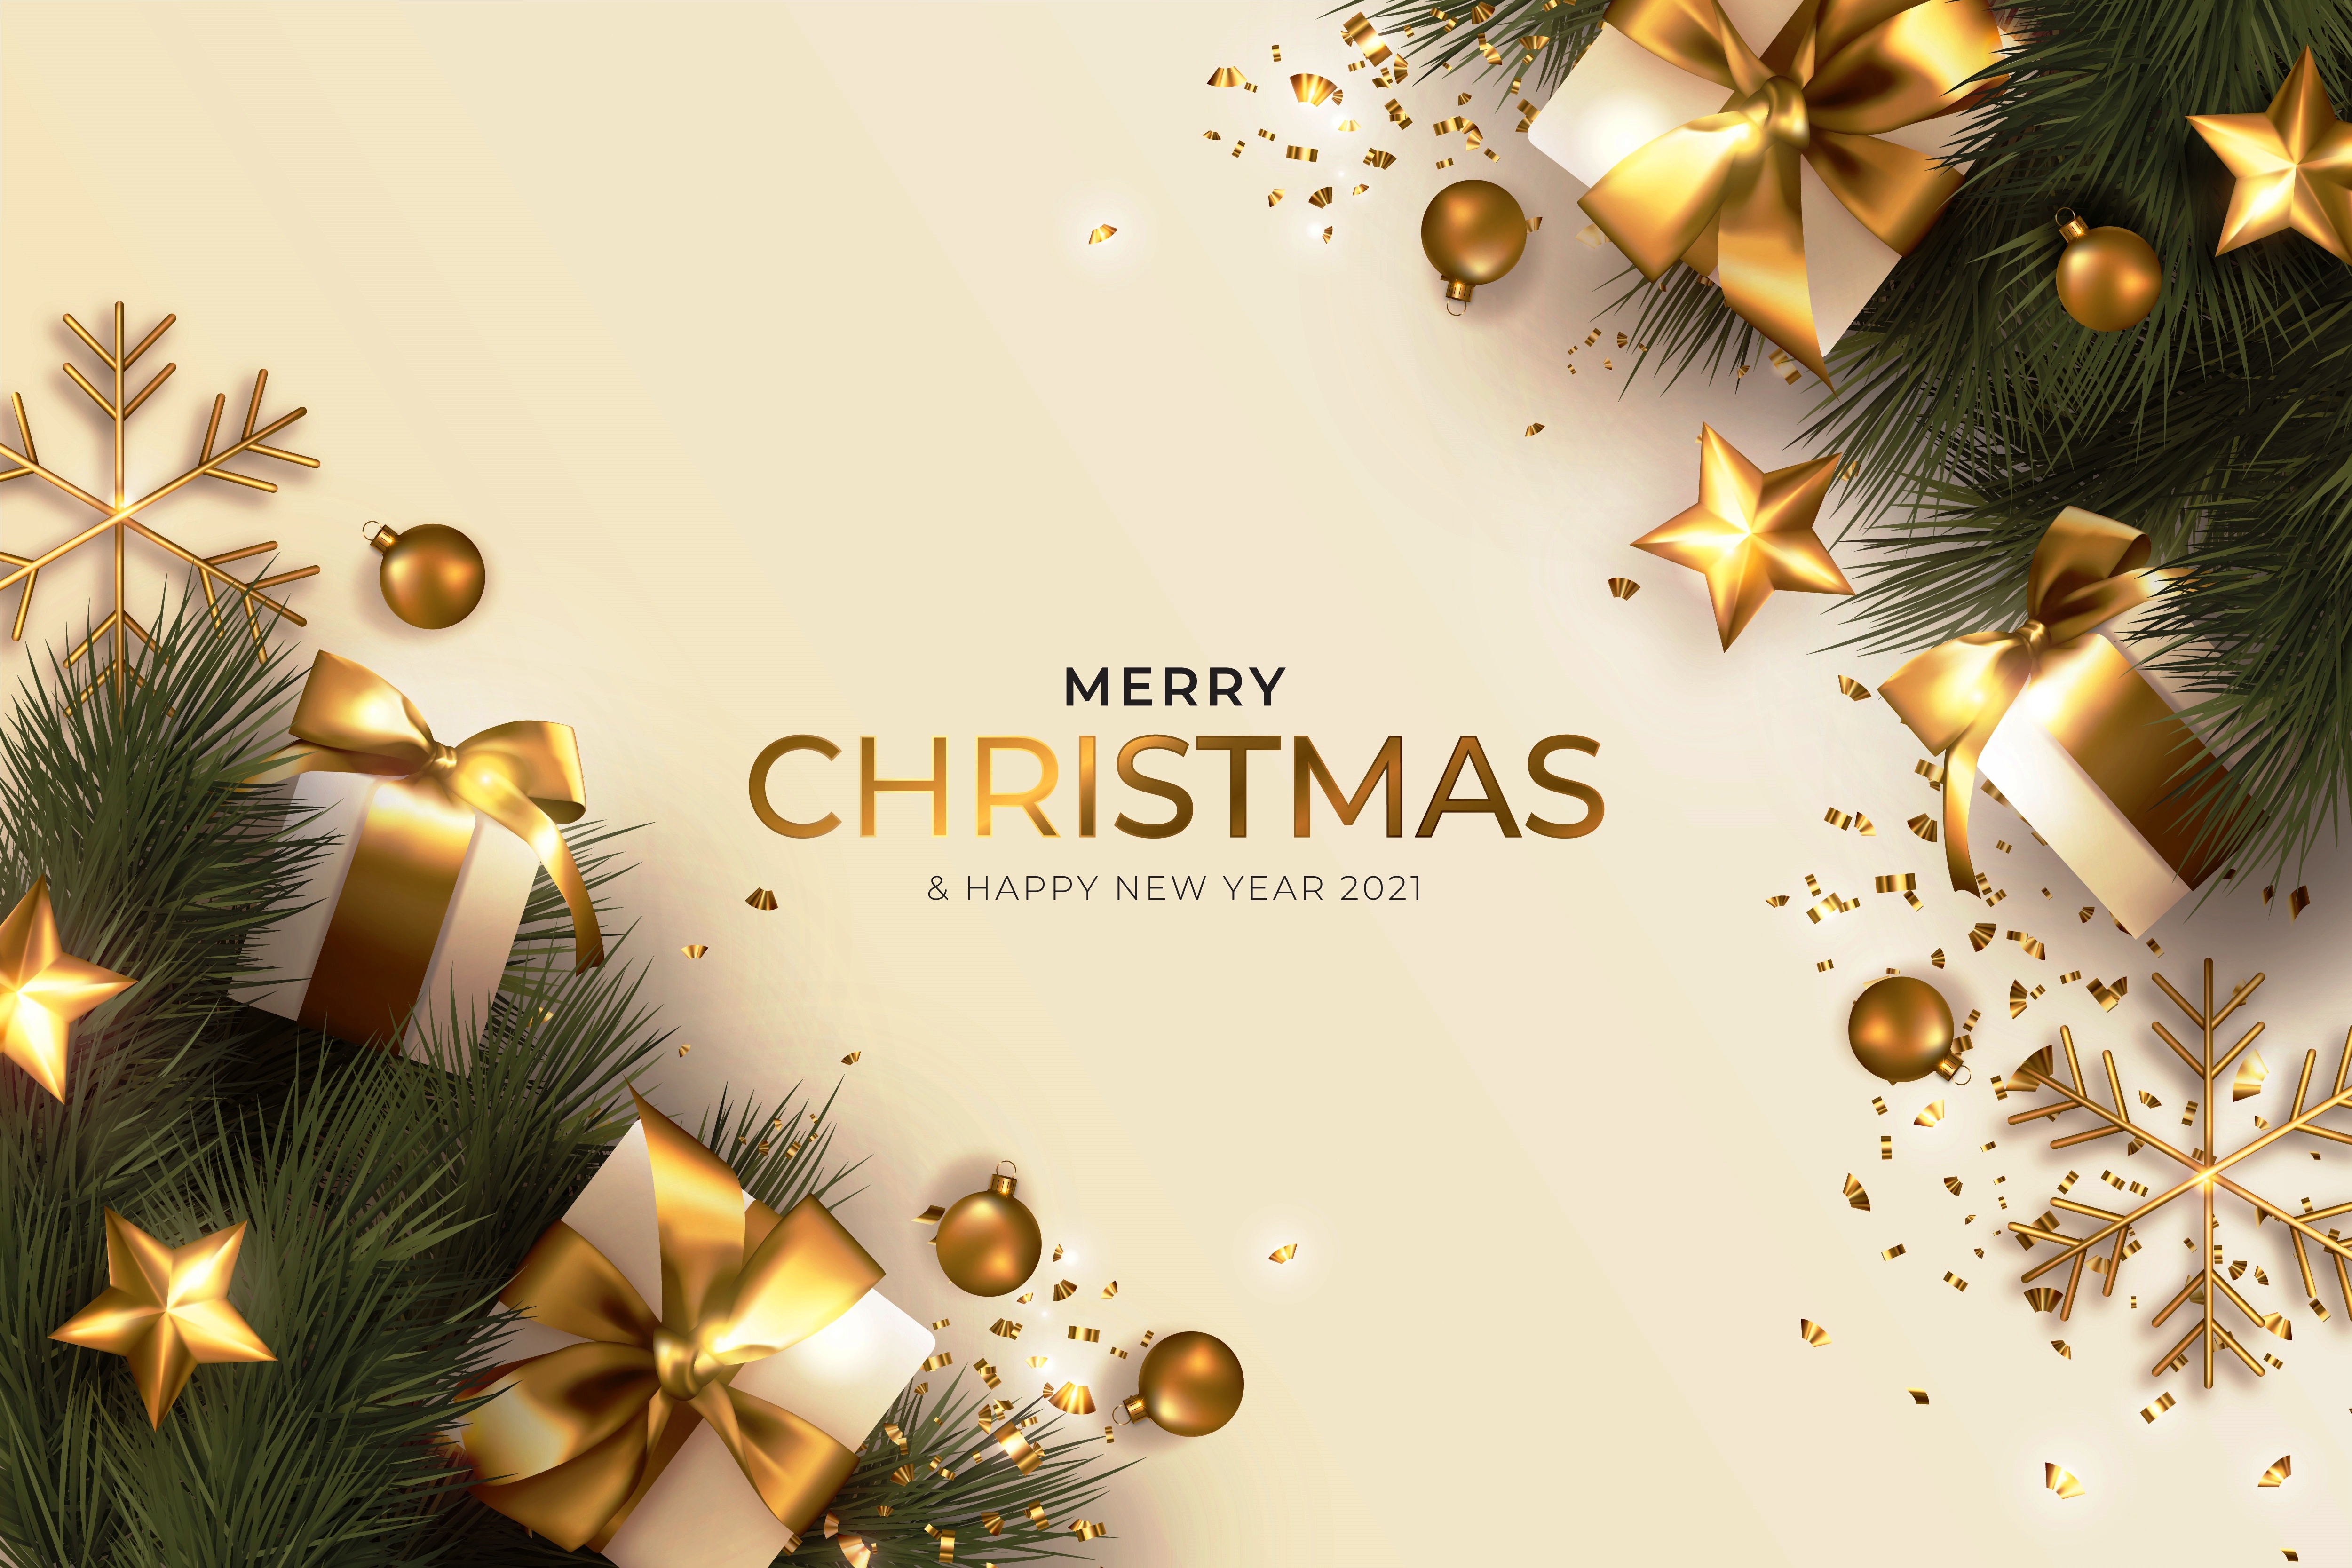 merry christmas hd images